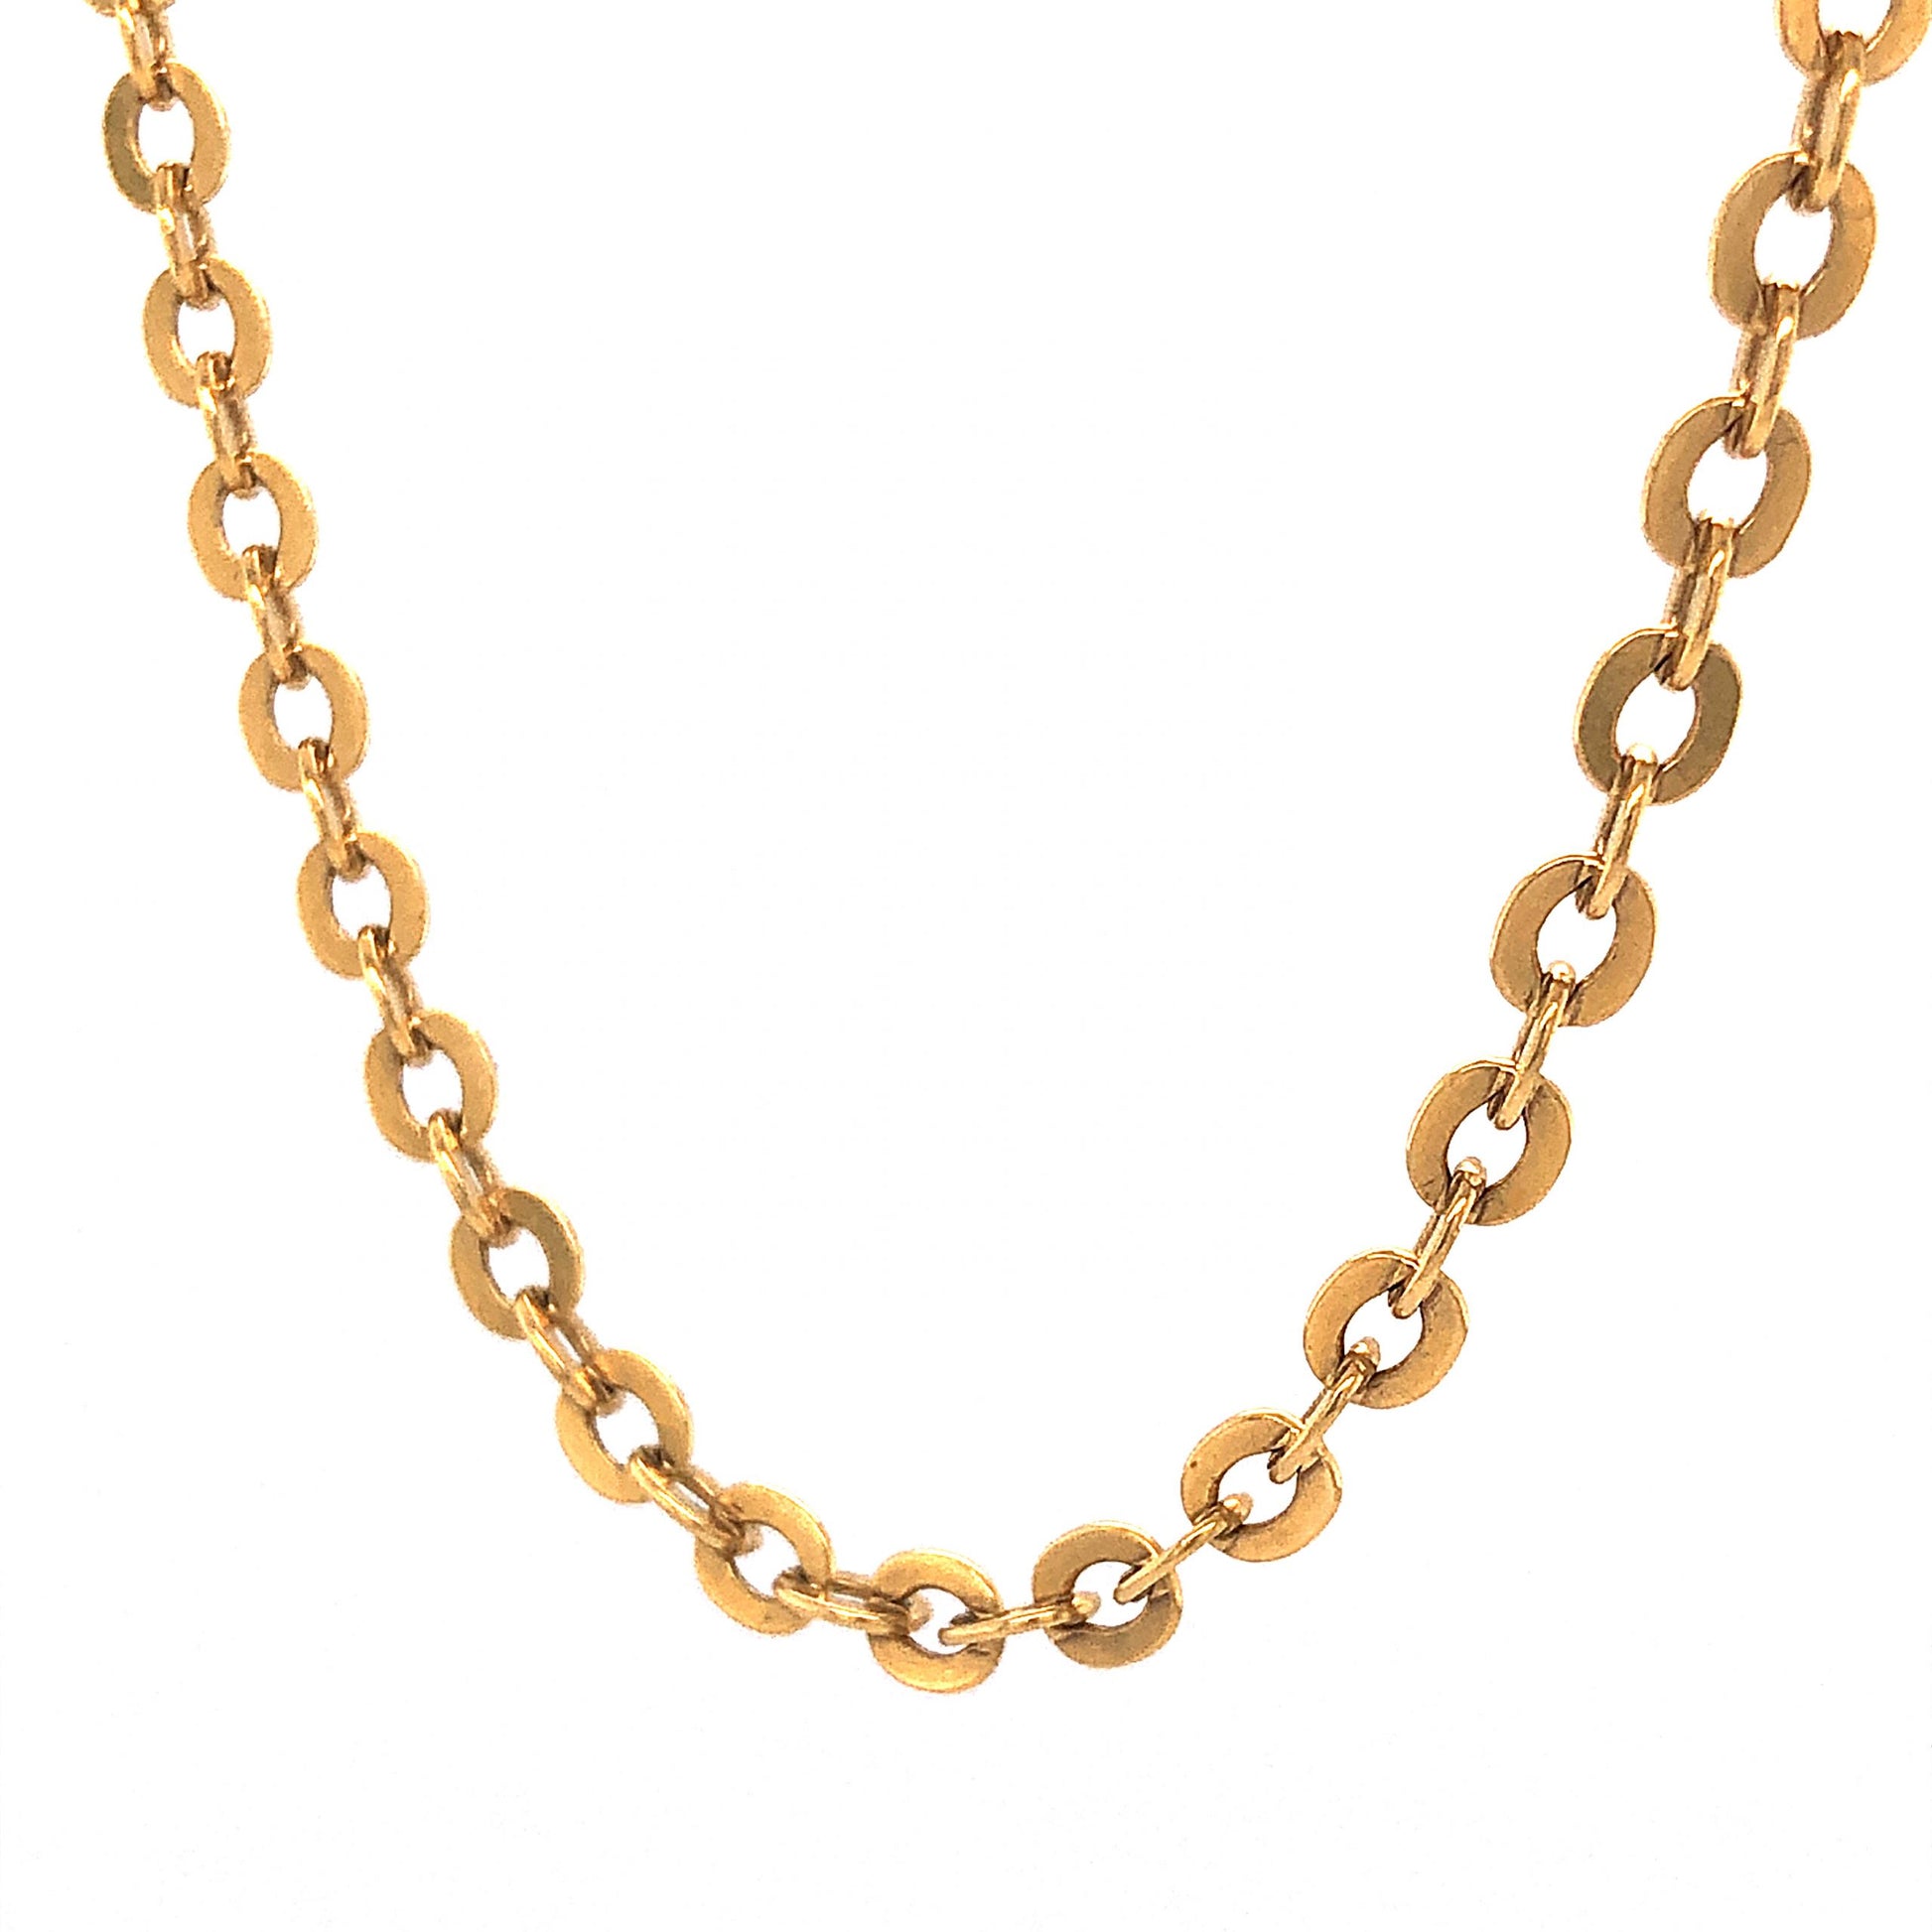 24 Inch Mid-Century Chain Necklace in 18k Yellow GoldComposition: 18 Karat Yellow GoldTotal Gram Weight: 17.7 gInscription: 750